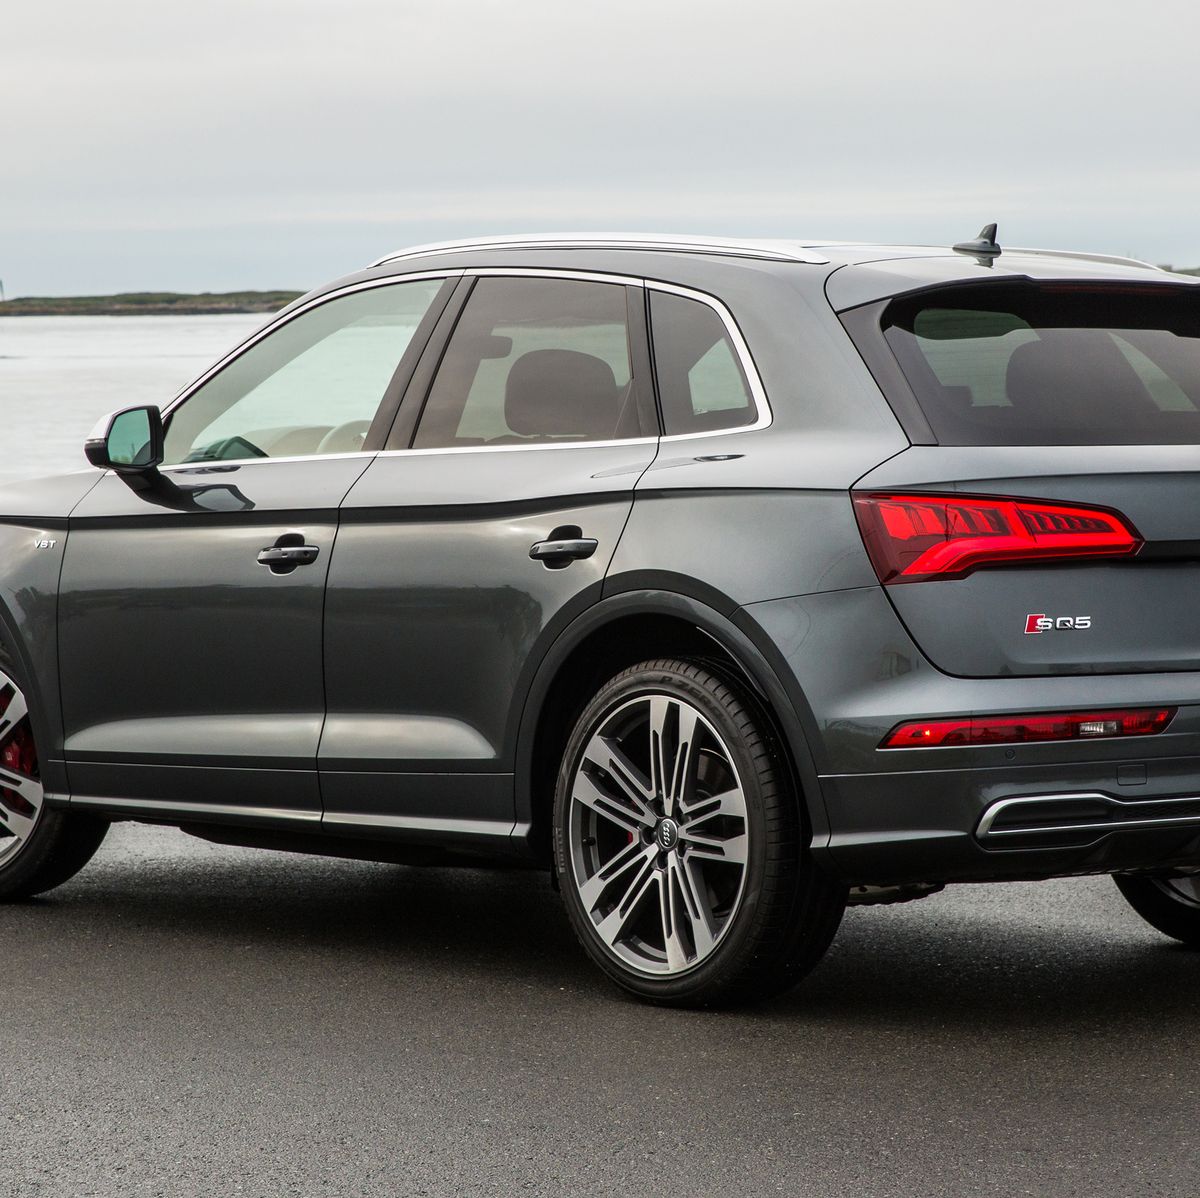 The Audi SQ5 Is What This Generation's Muscle Car Looks Like